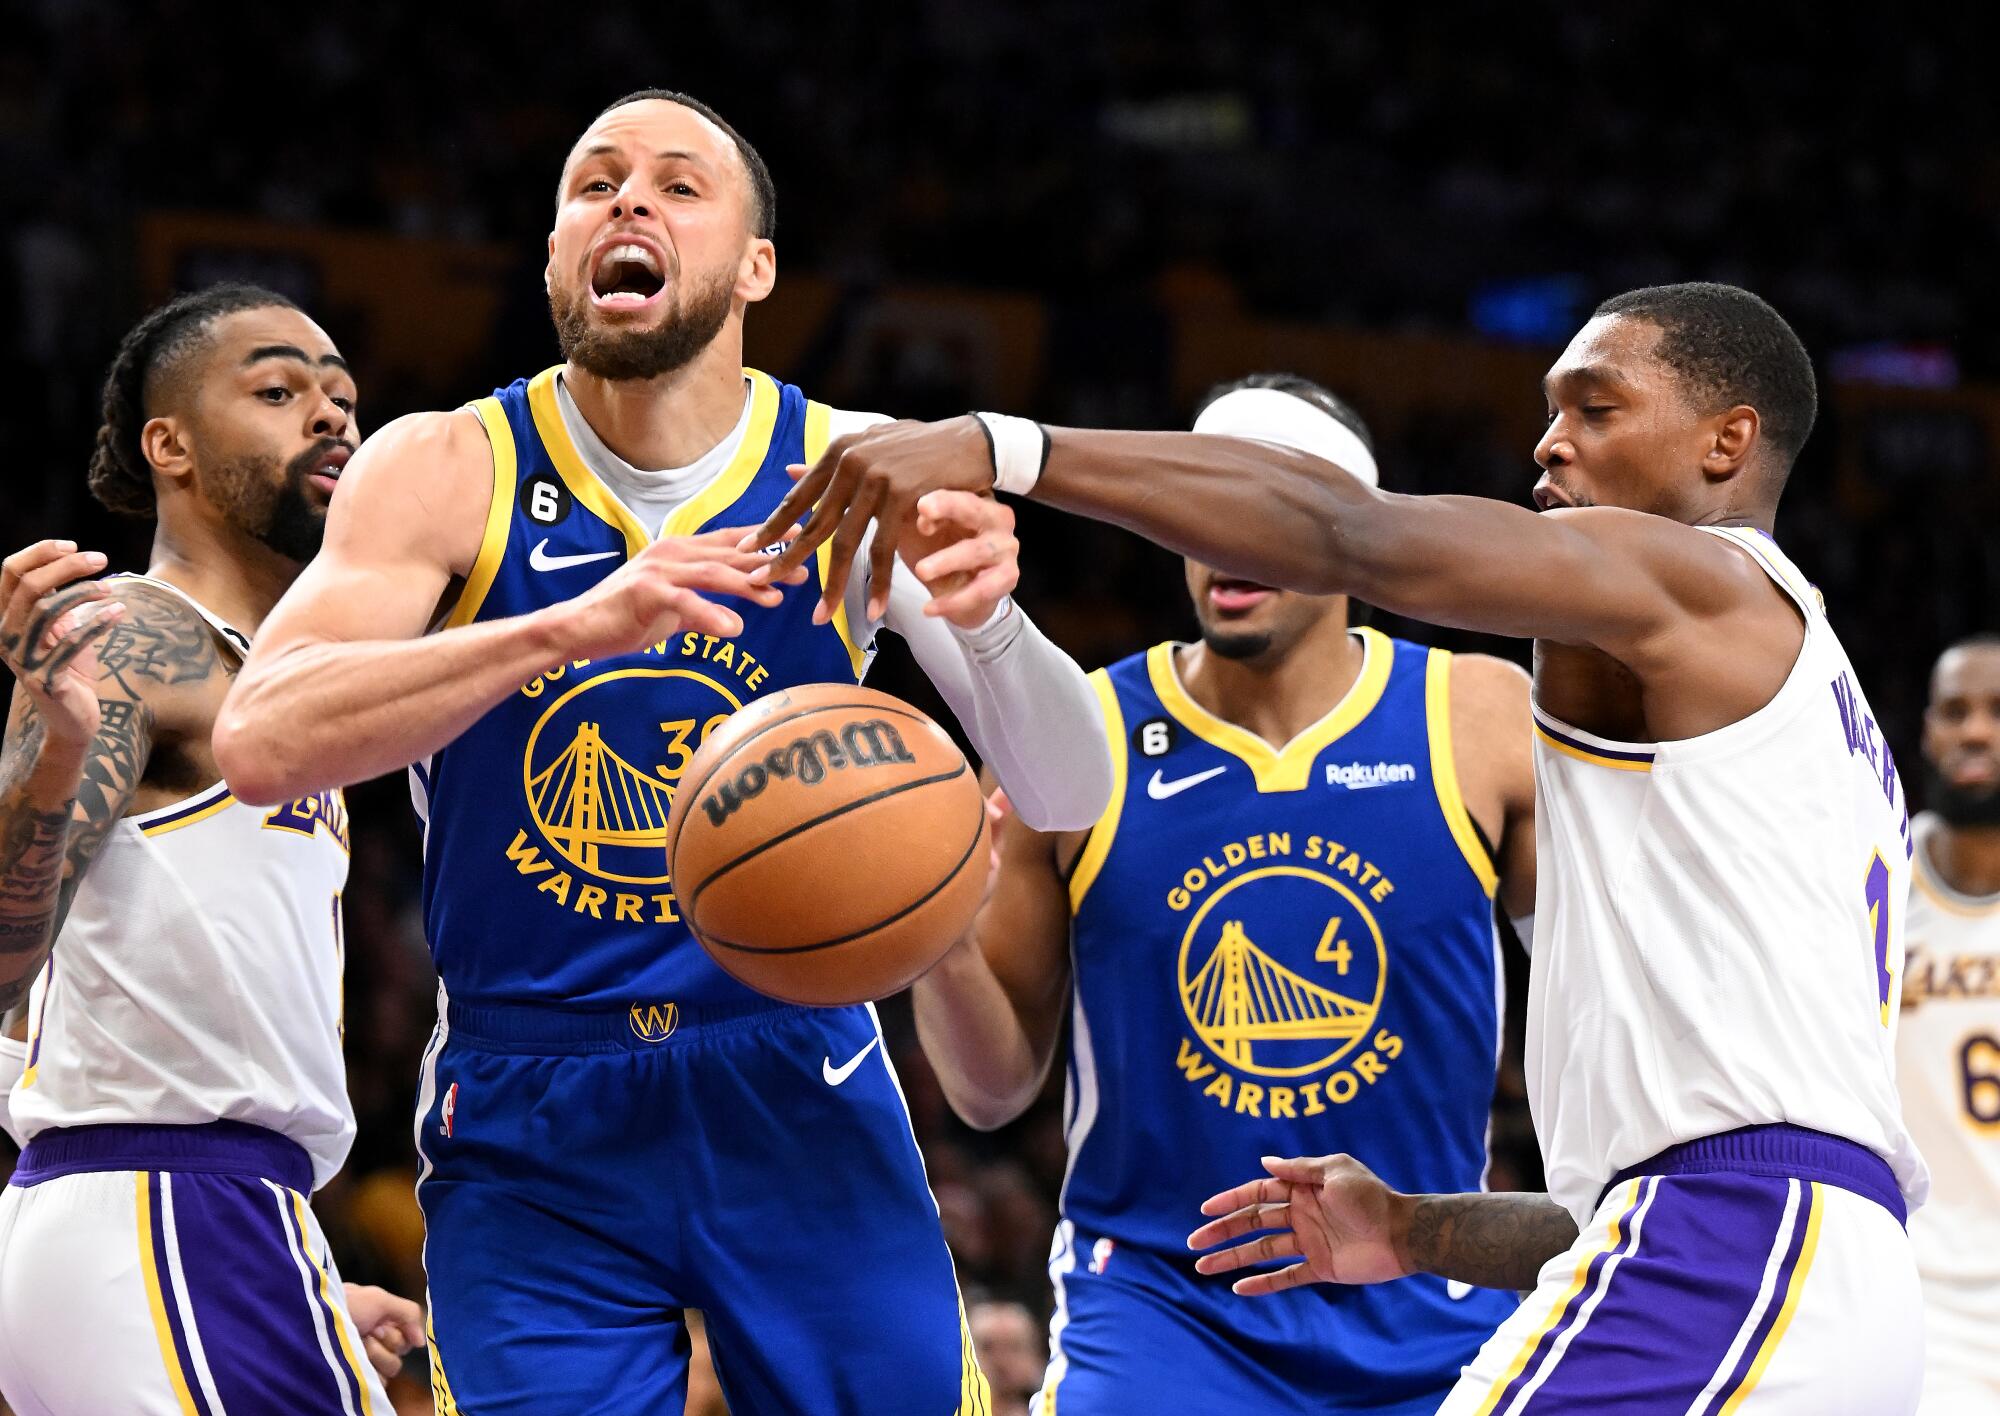 Lakers guard Lonnie Walker IV, right, strips the ball away from Stephen Curry in the second quarter.